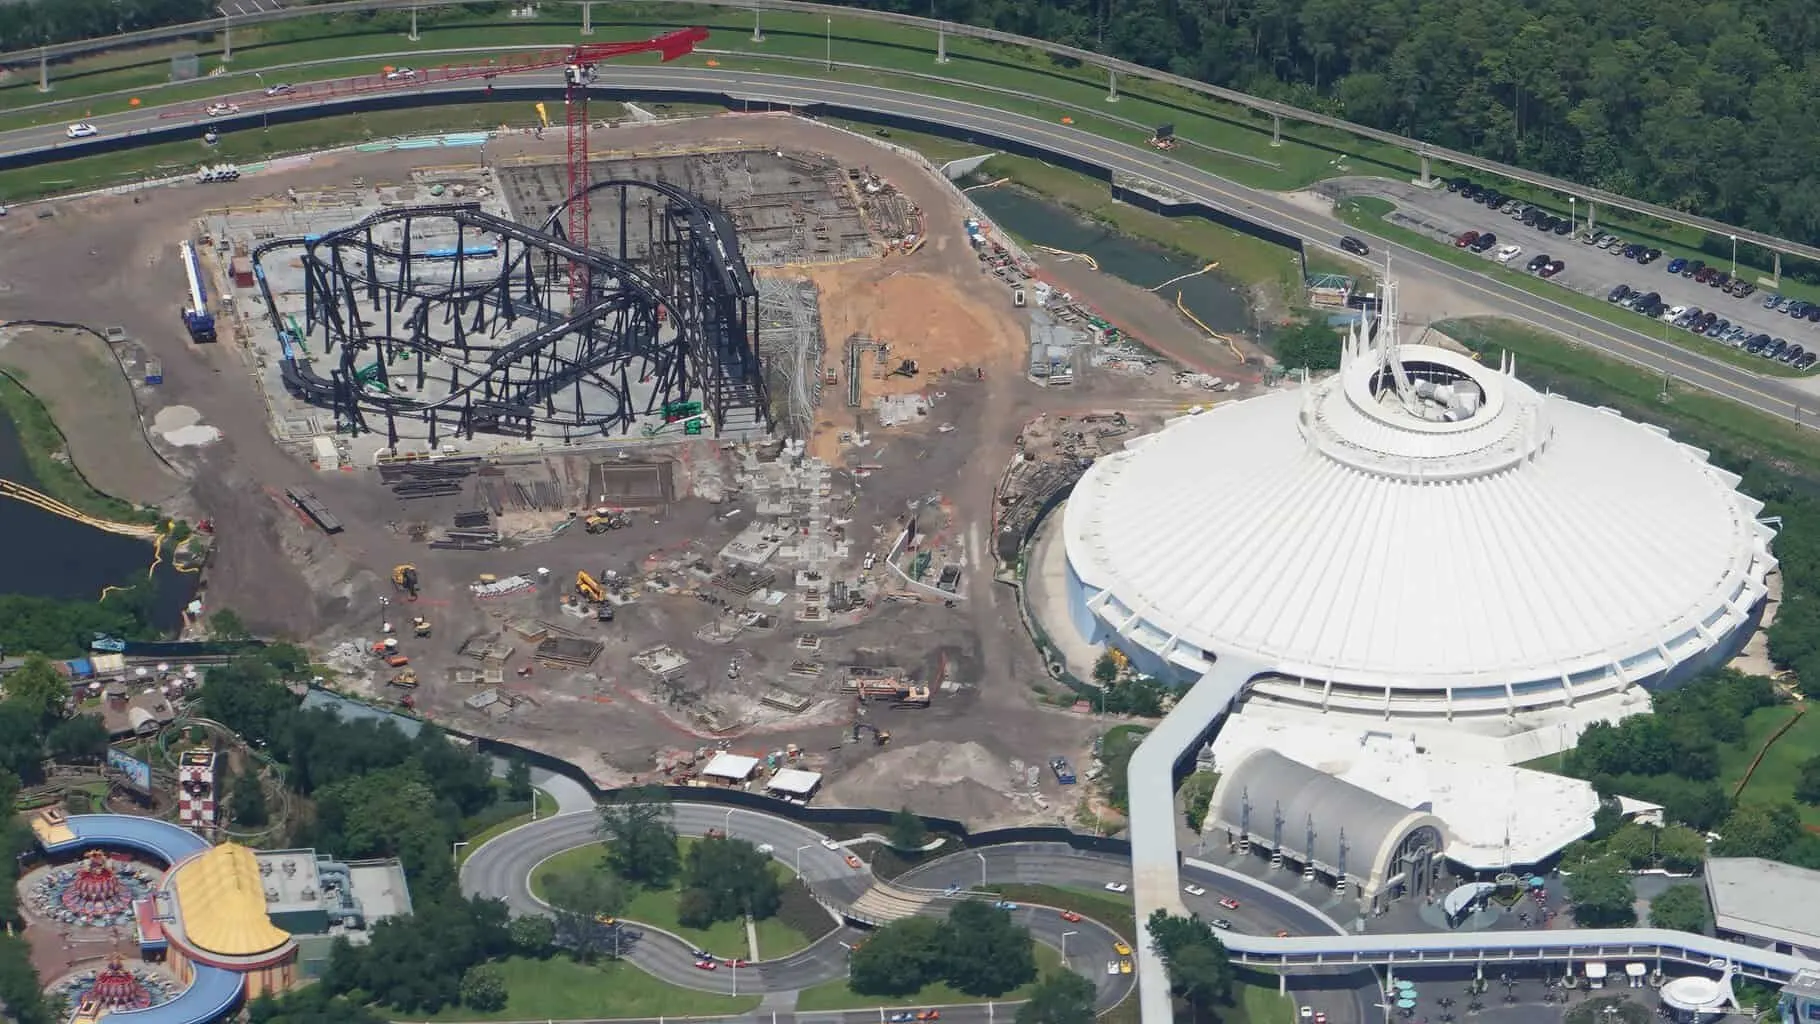 TRON coaster and Space Mountain July 2019